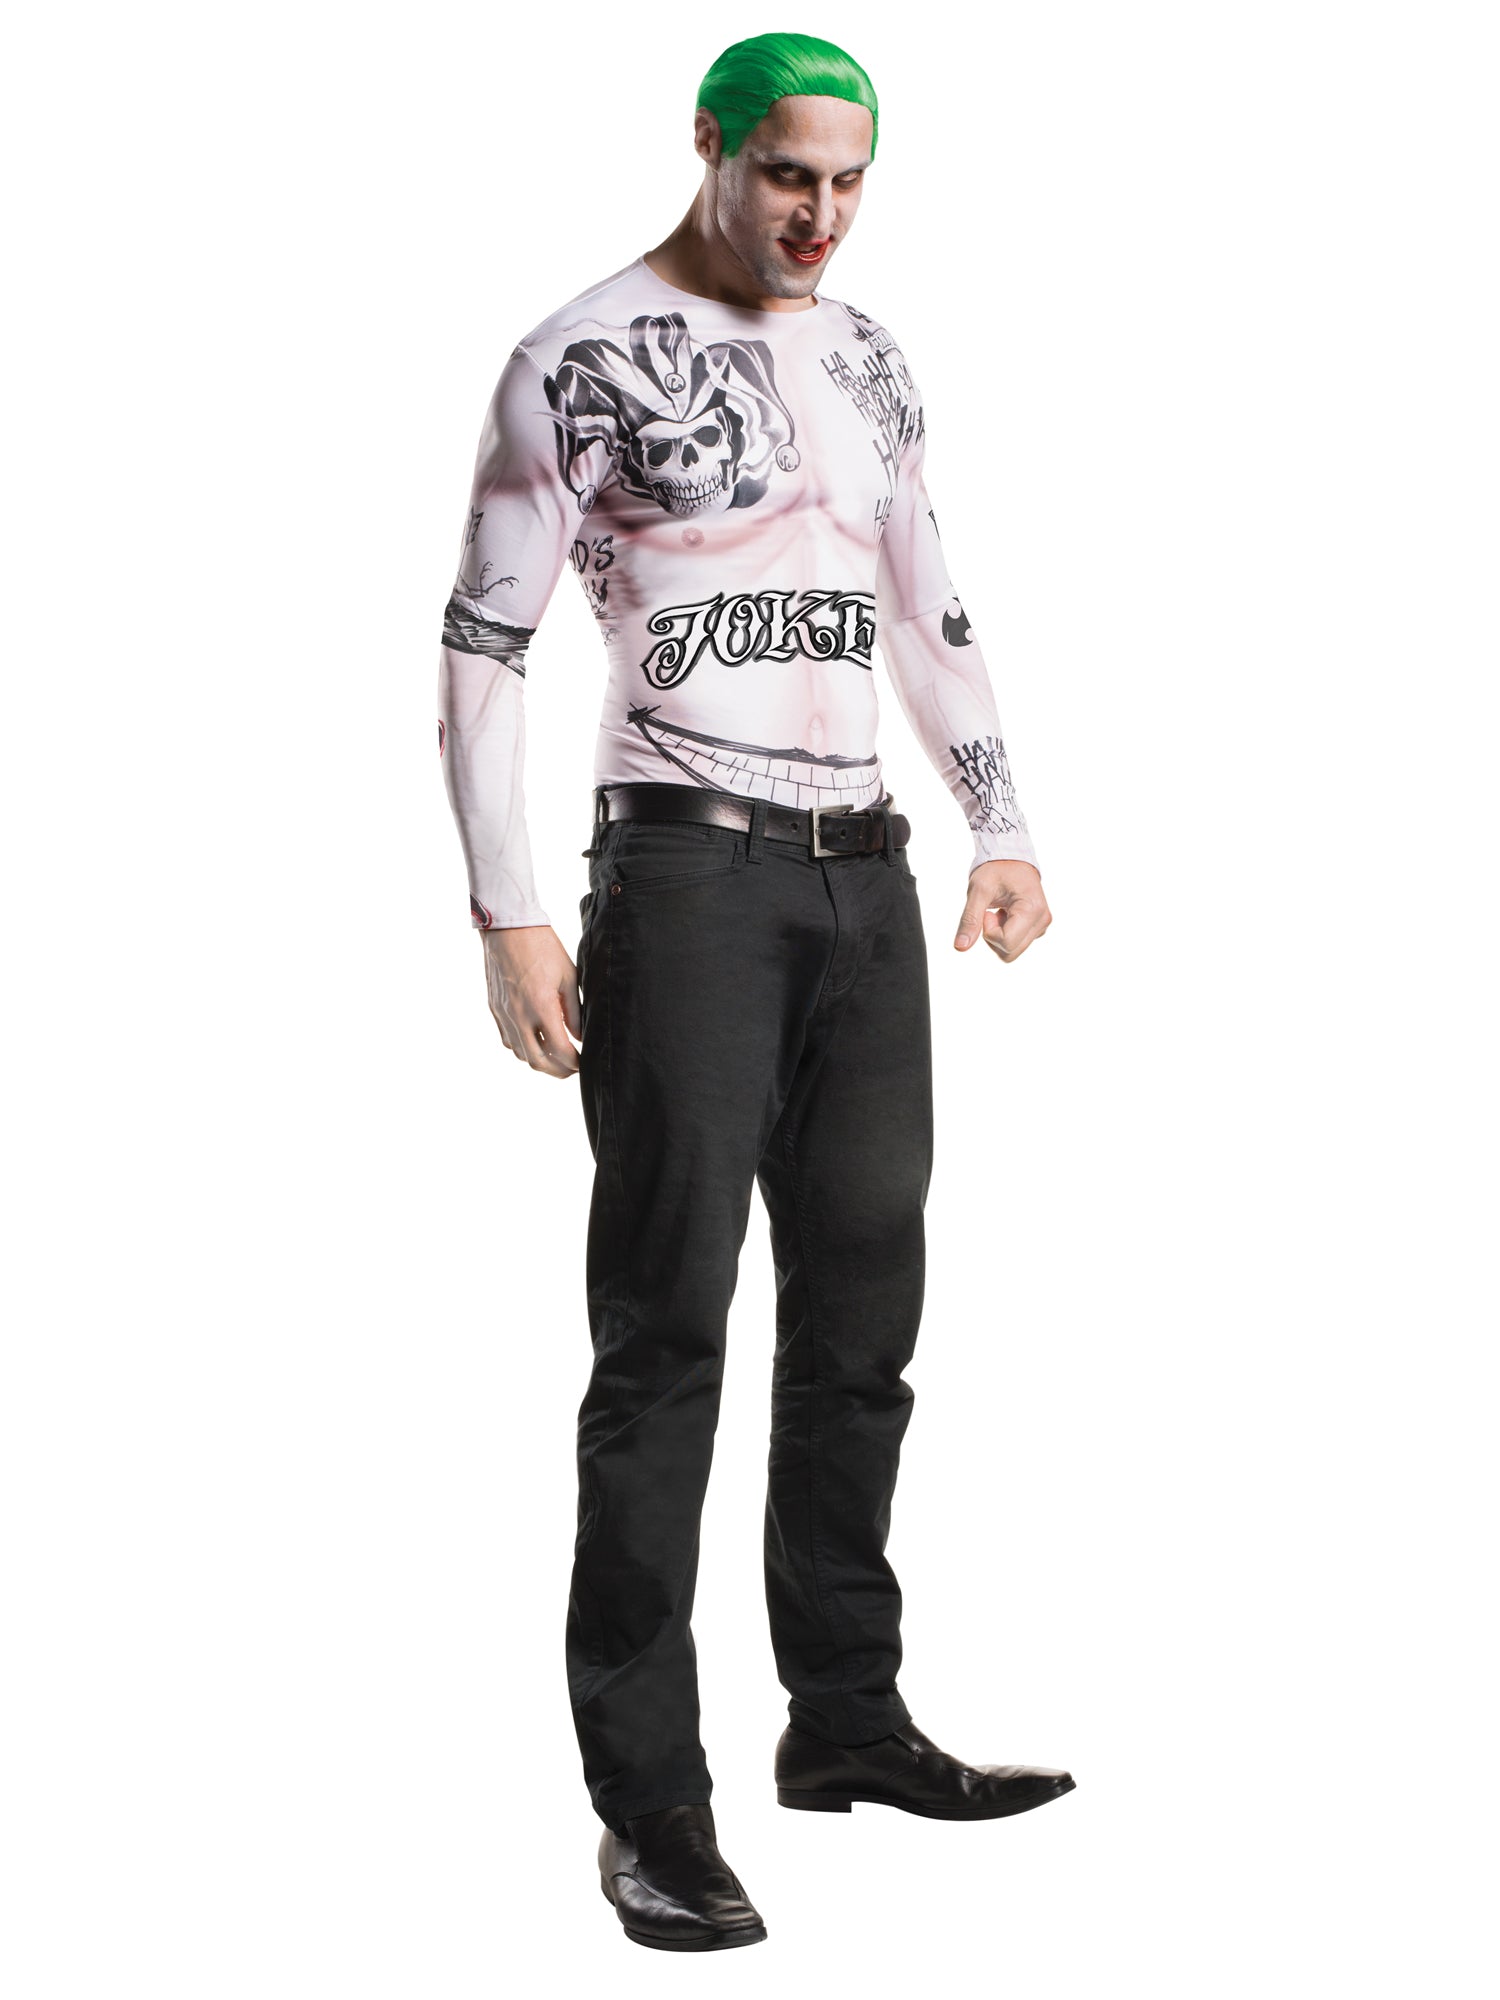 The Joker, Suicide Squad, Suicide Squad, Suicide Squad, Multi, DC, Adult Costume, Standard, Front